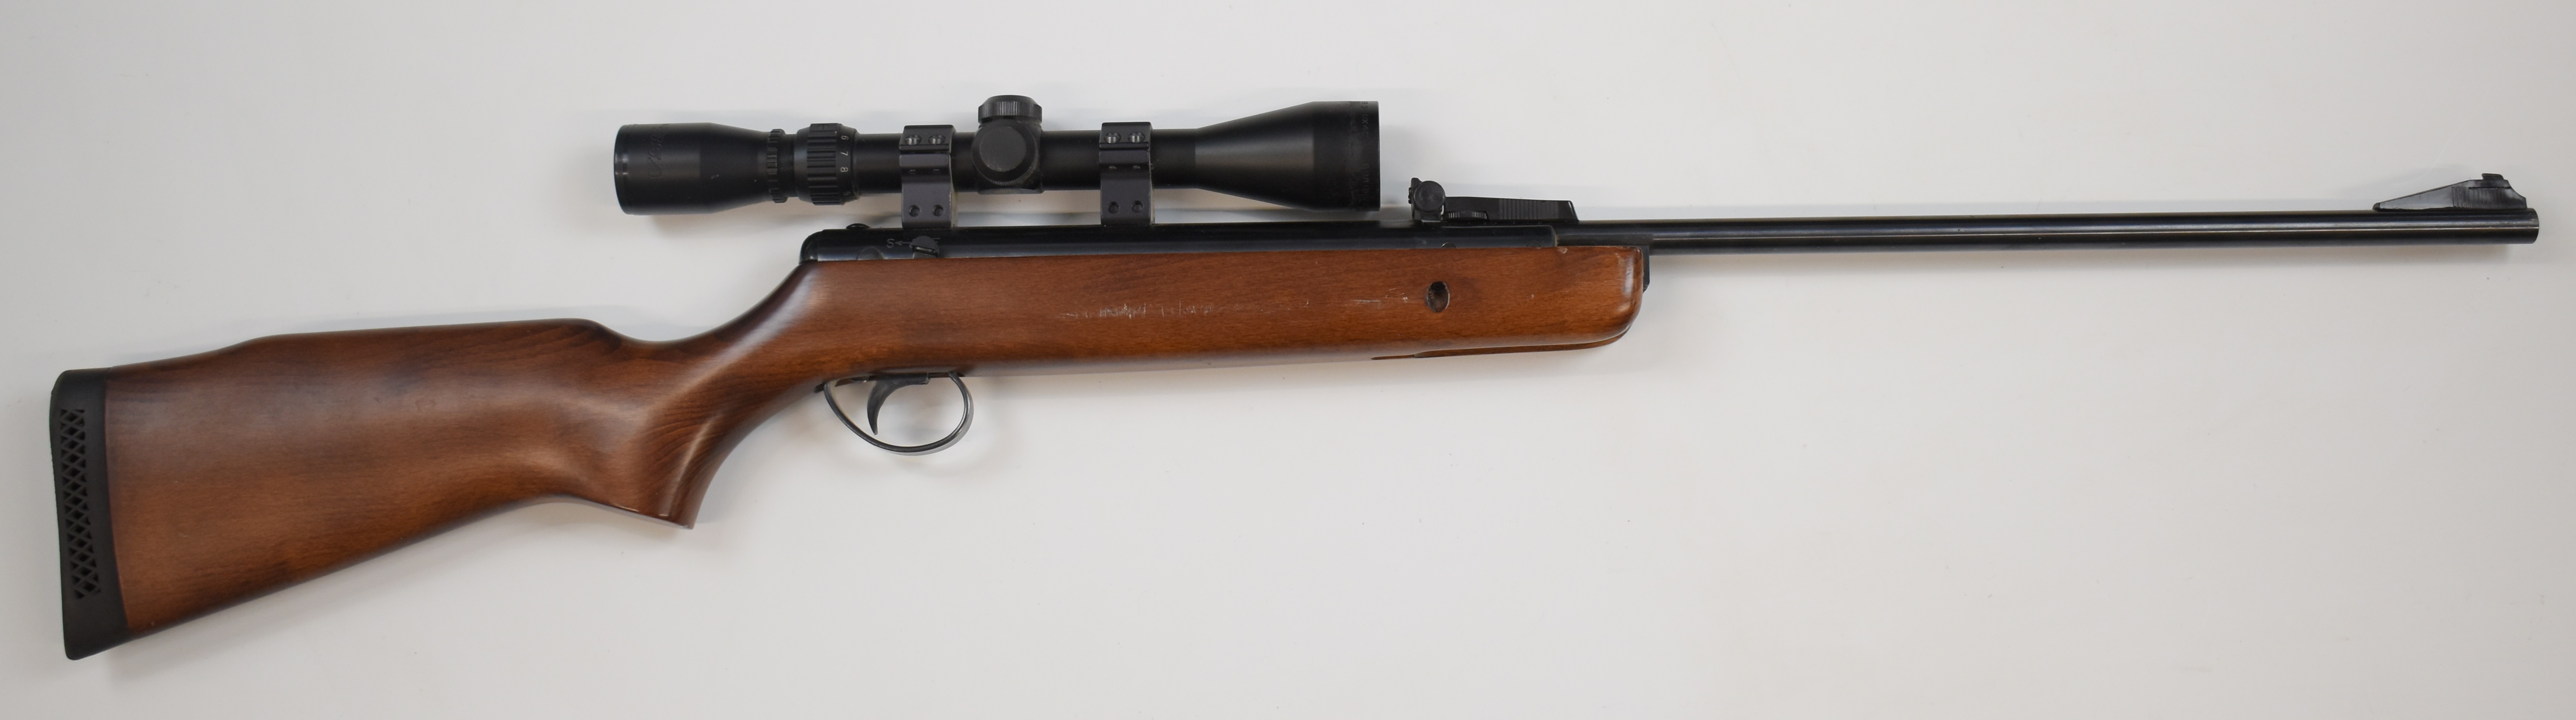 BSA Supersport .22 air rifle with semi-pistol grip, raised cheek piece, adjustable trigger and BSA - Image 2 of 9